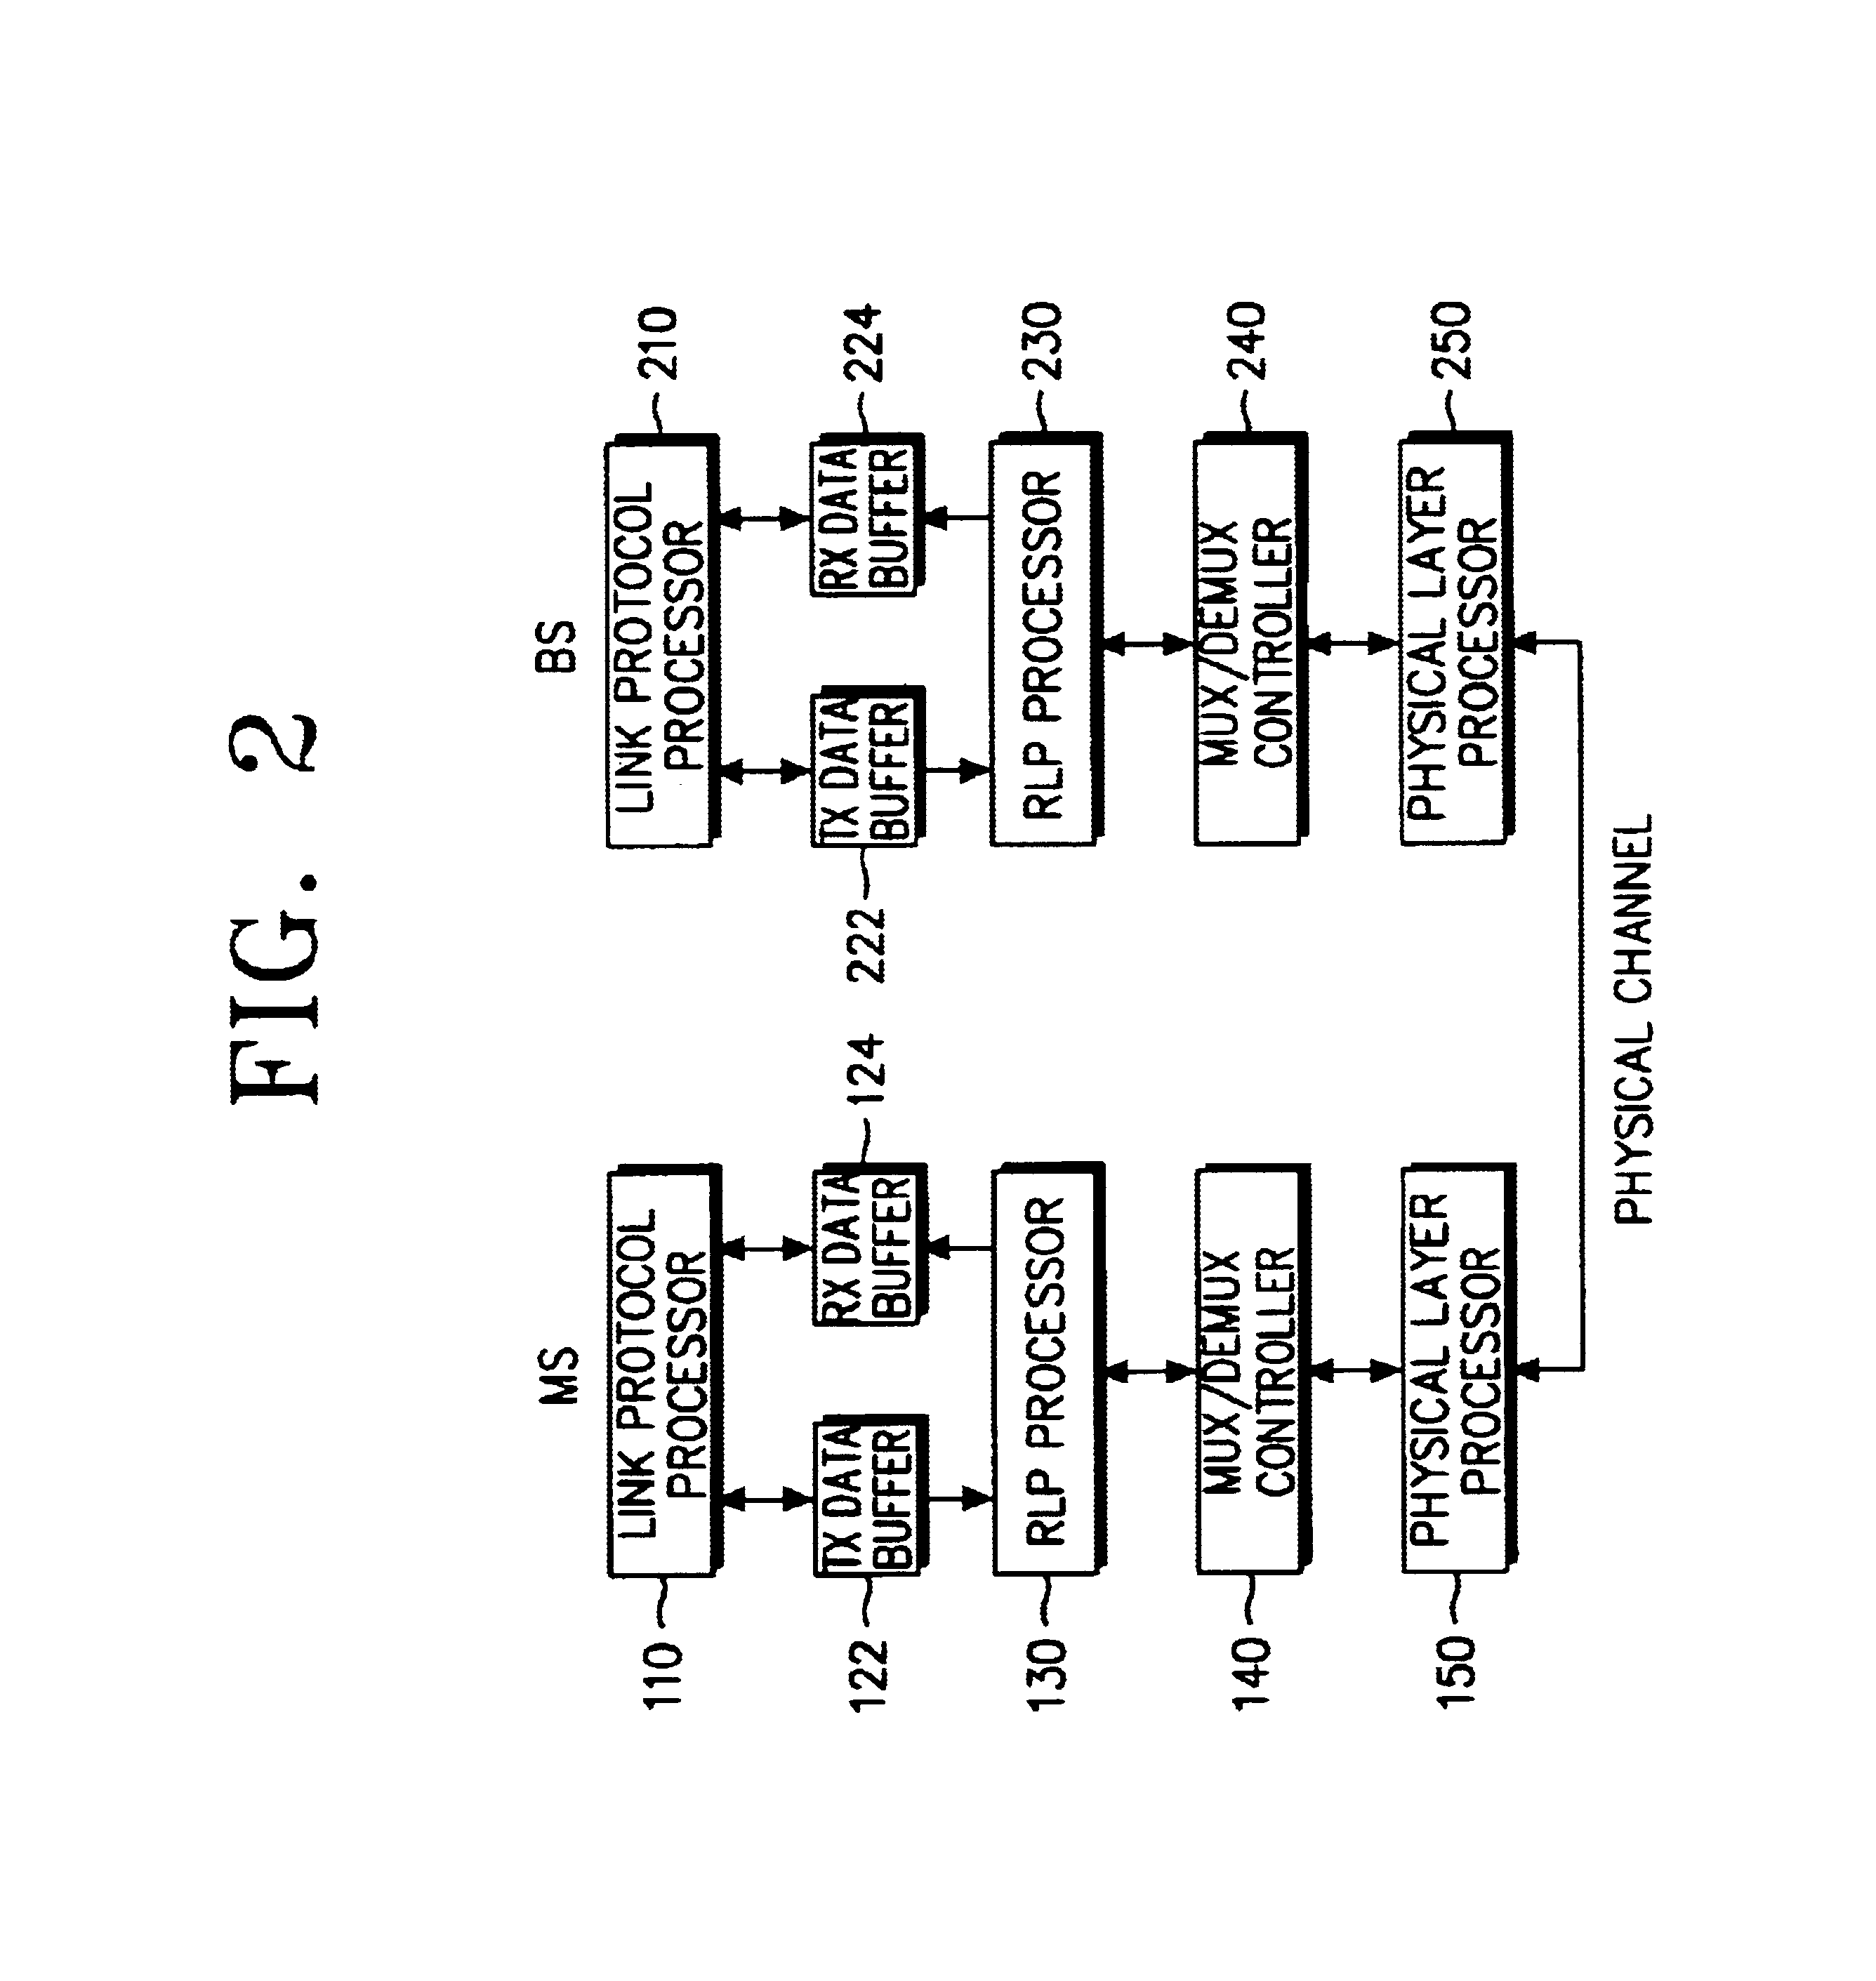 Apparatus and method for exchanging variable-length data according to a radio link protocol in a mobile communication system